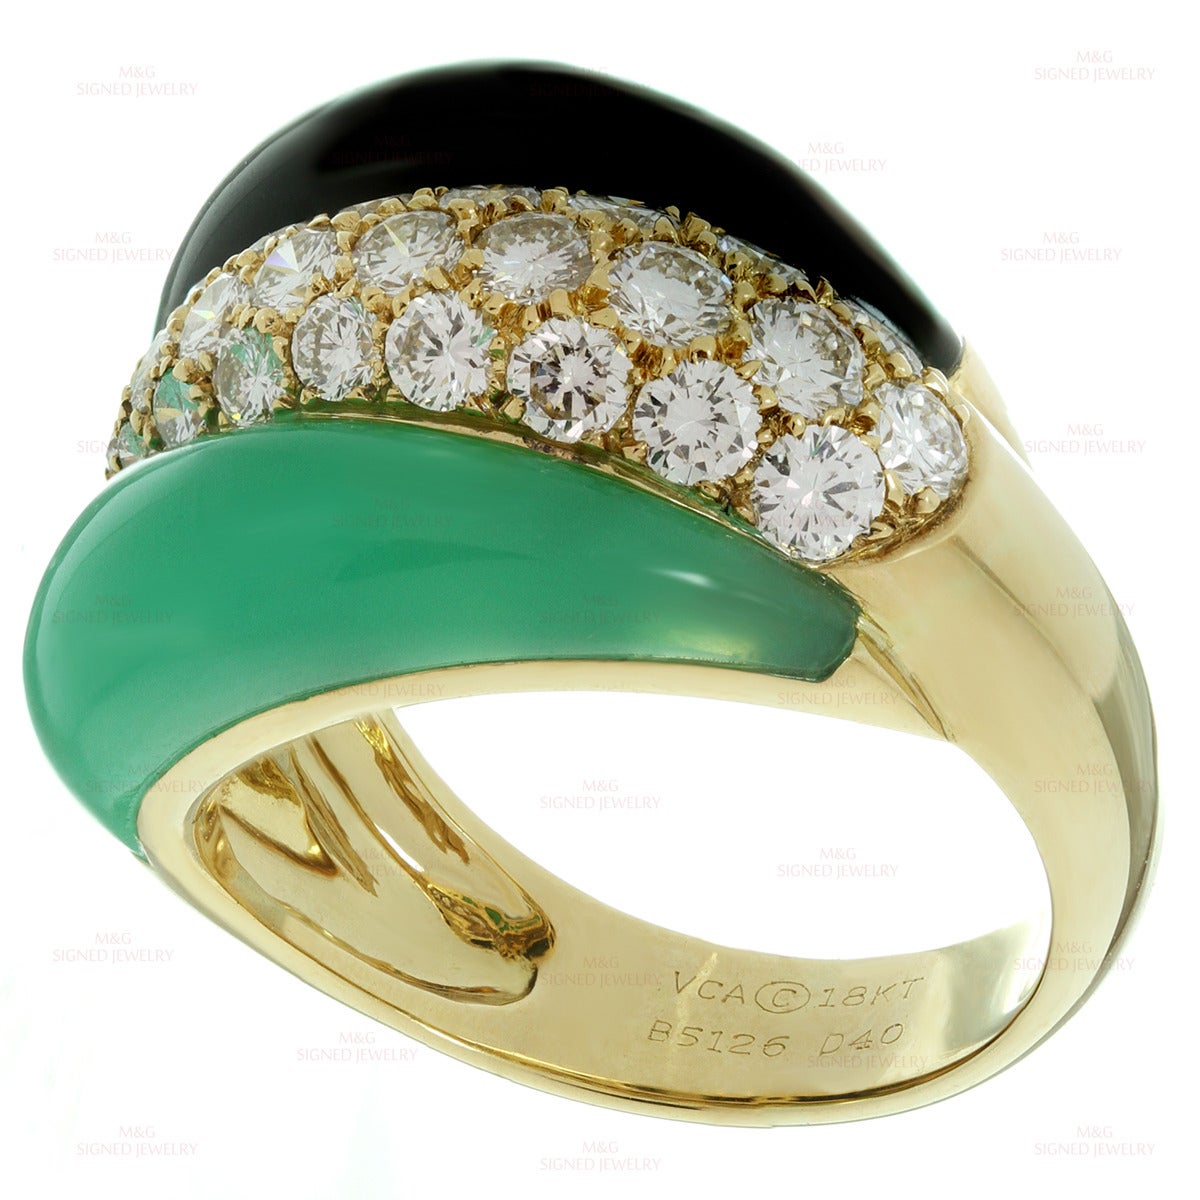 This chic Van Cleef & Arpels ring is crafted in 18k yellow gold and beautifully set with green chrysphrase, black onyx, and sparkling round brilliant-cut E-F VVS1-VVS2 diamonds of an estimated 0.40 carats. Made in France circa 1990s.